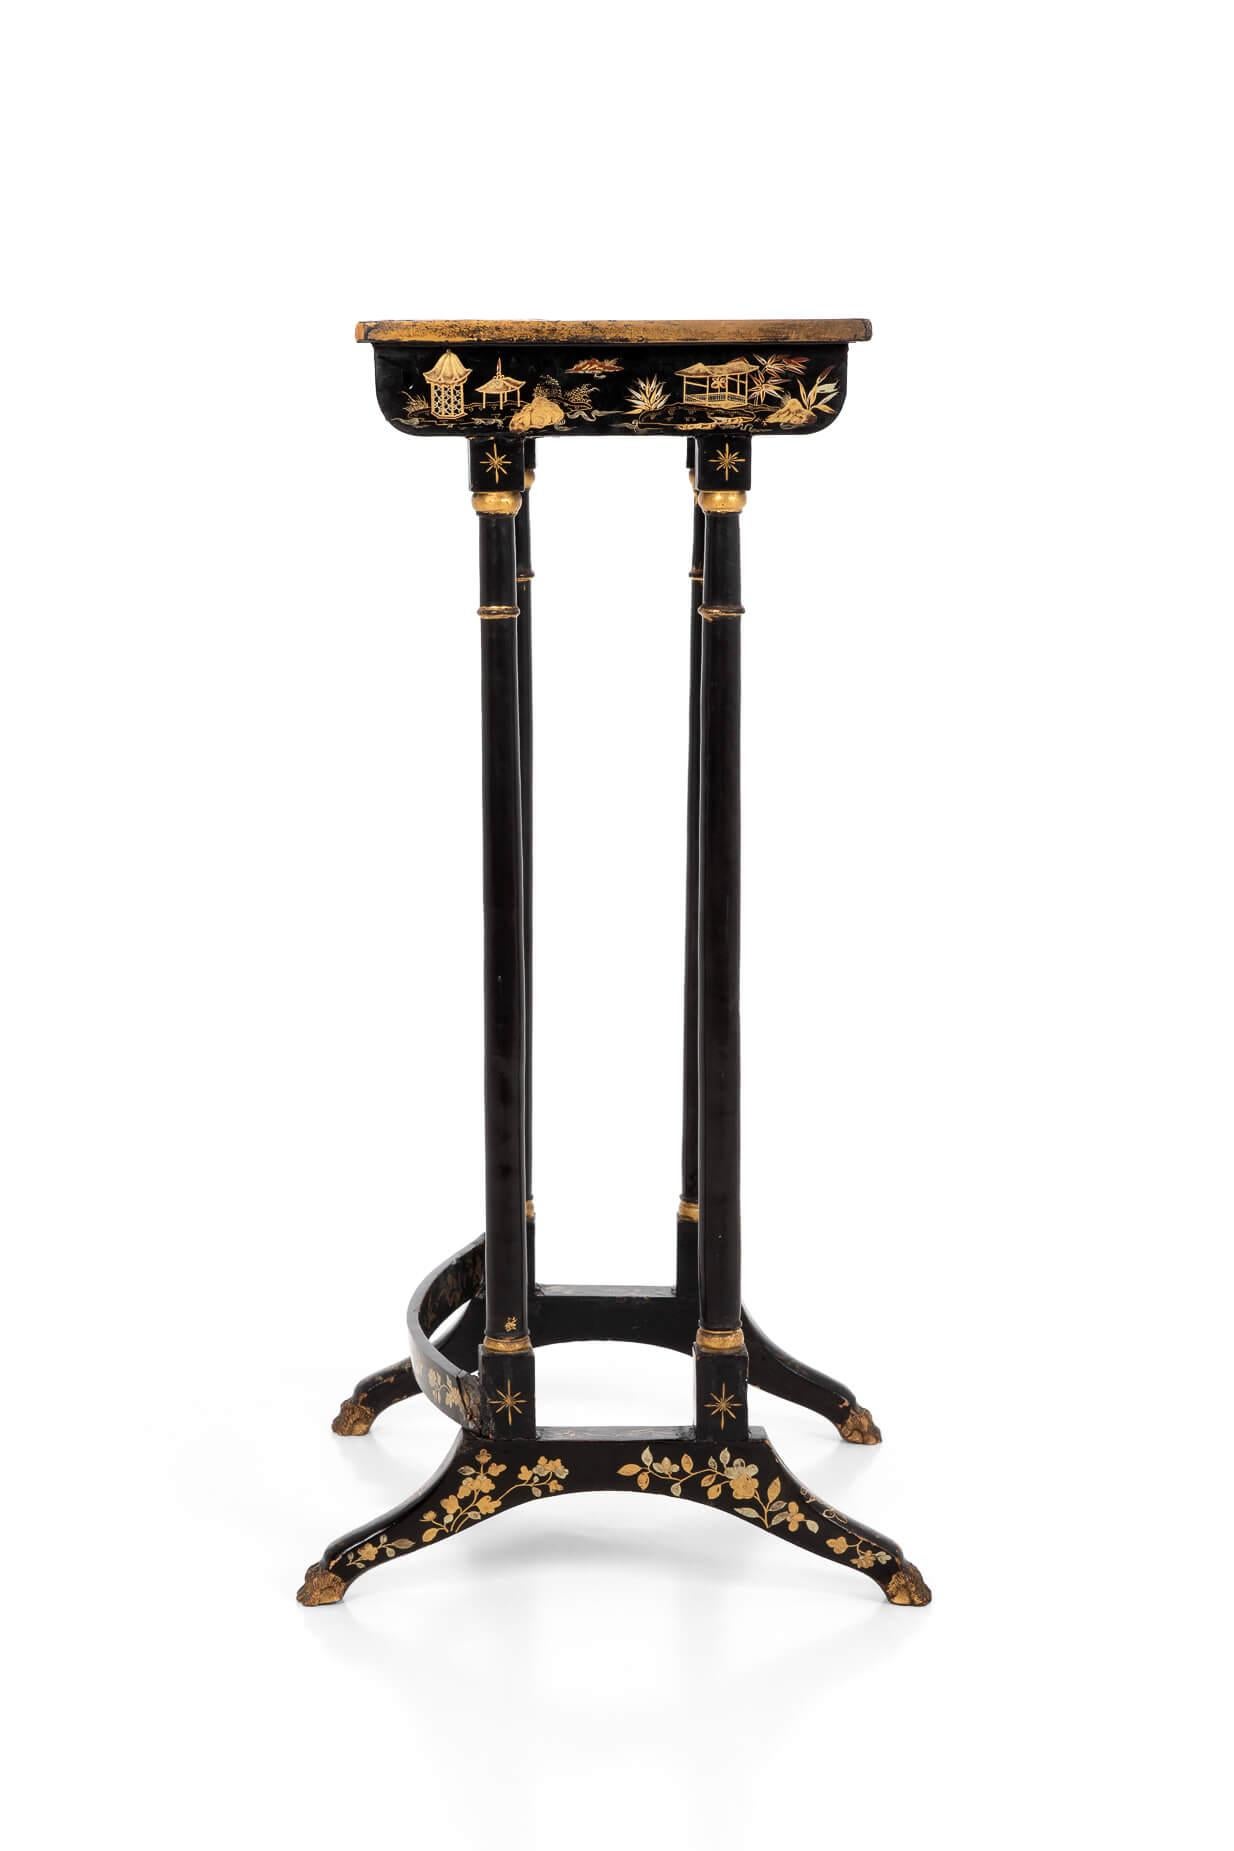 Nest of Three Regency Chinoiserie Gilt And Black Lacquer Tables, circa 1815 For Sale 2